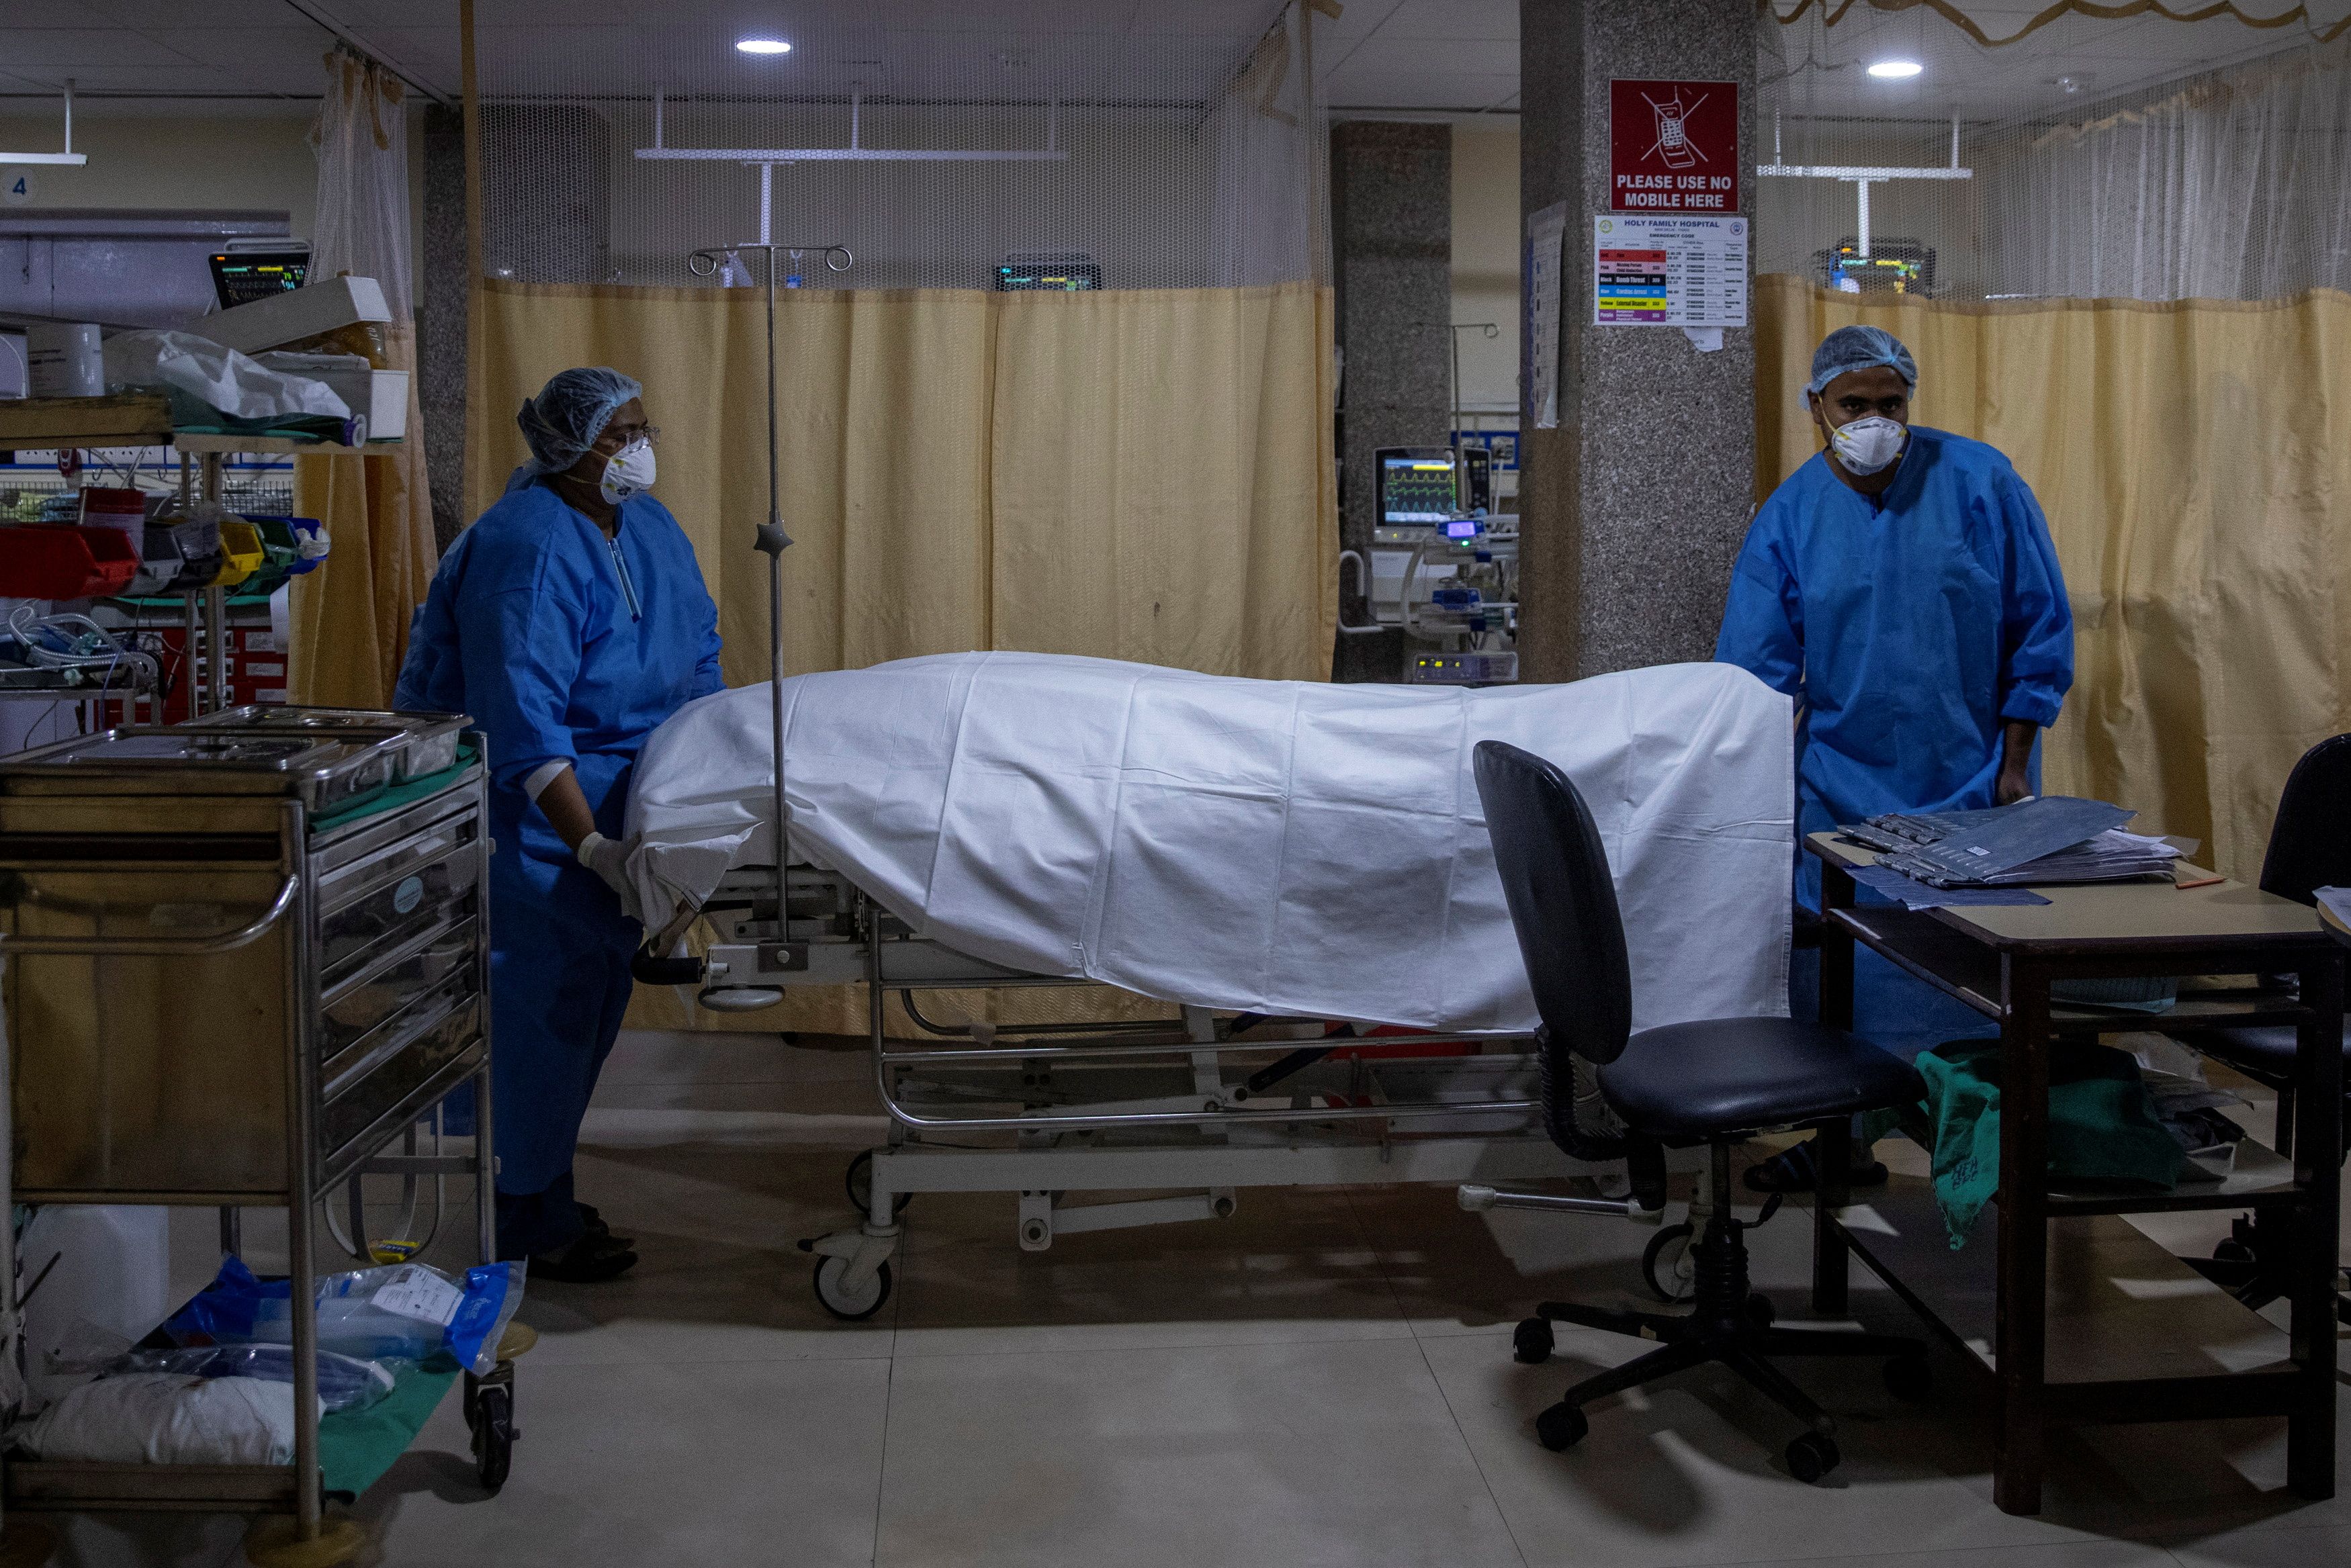 Hospital workers remove the body of a person, who died from the coronavirus disease (COVID-19), from the ICU ward at Holy Family Hospital in New Delhi